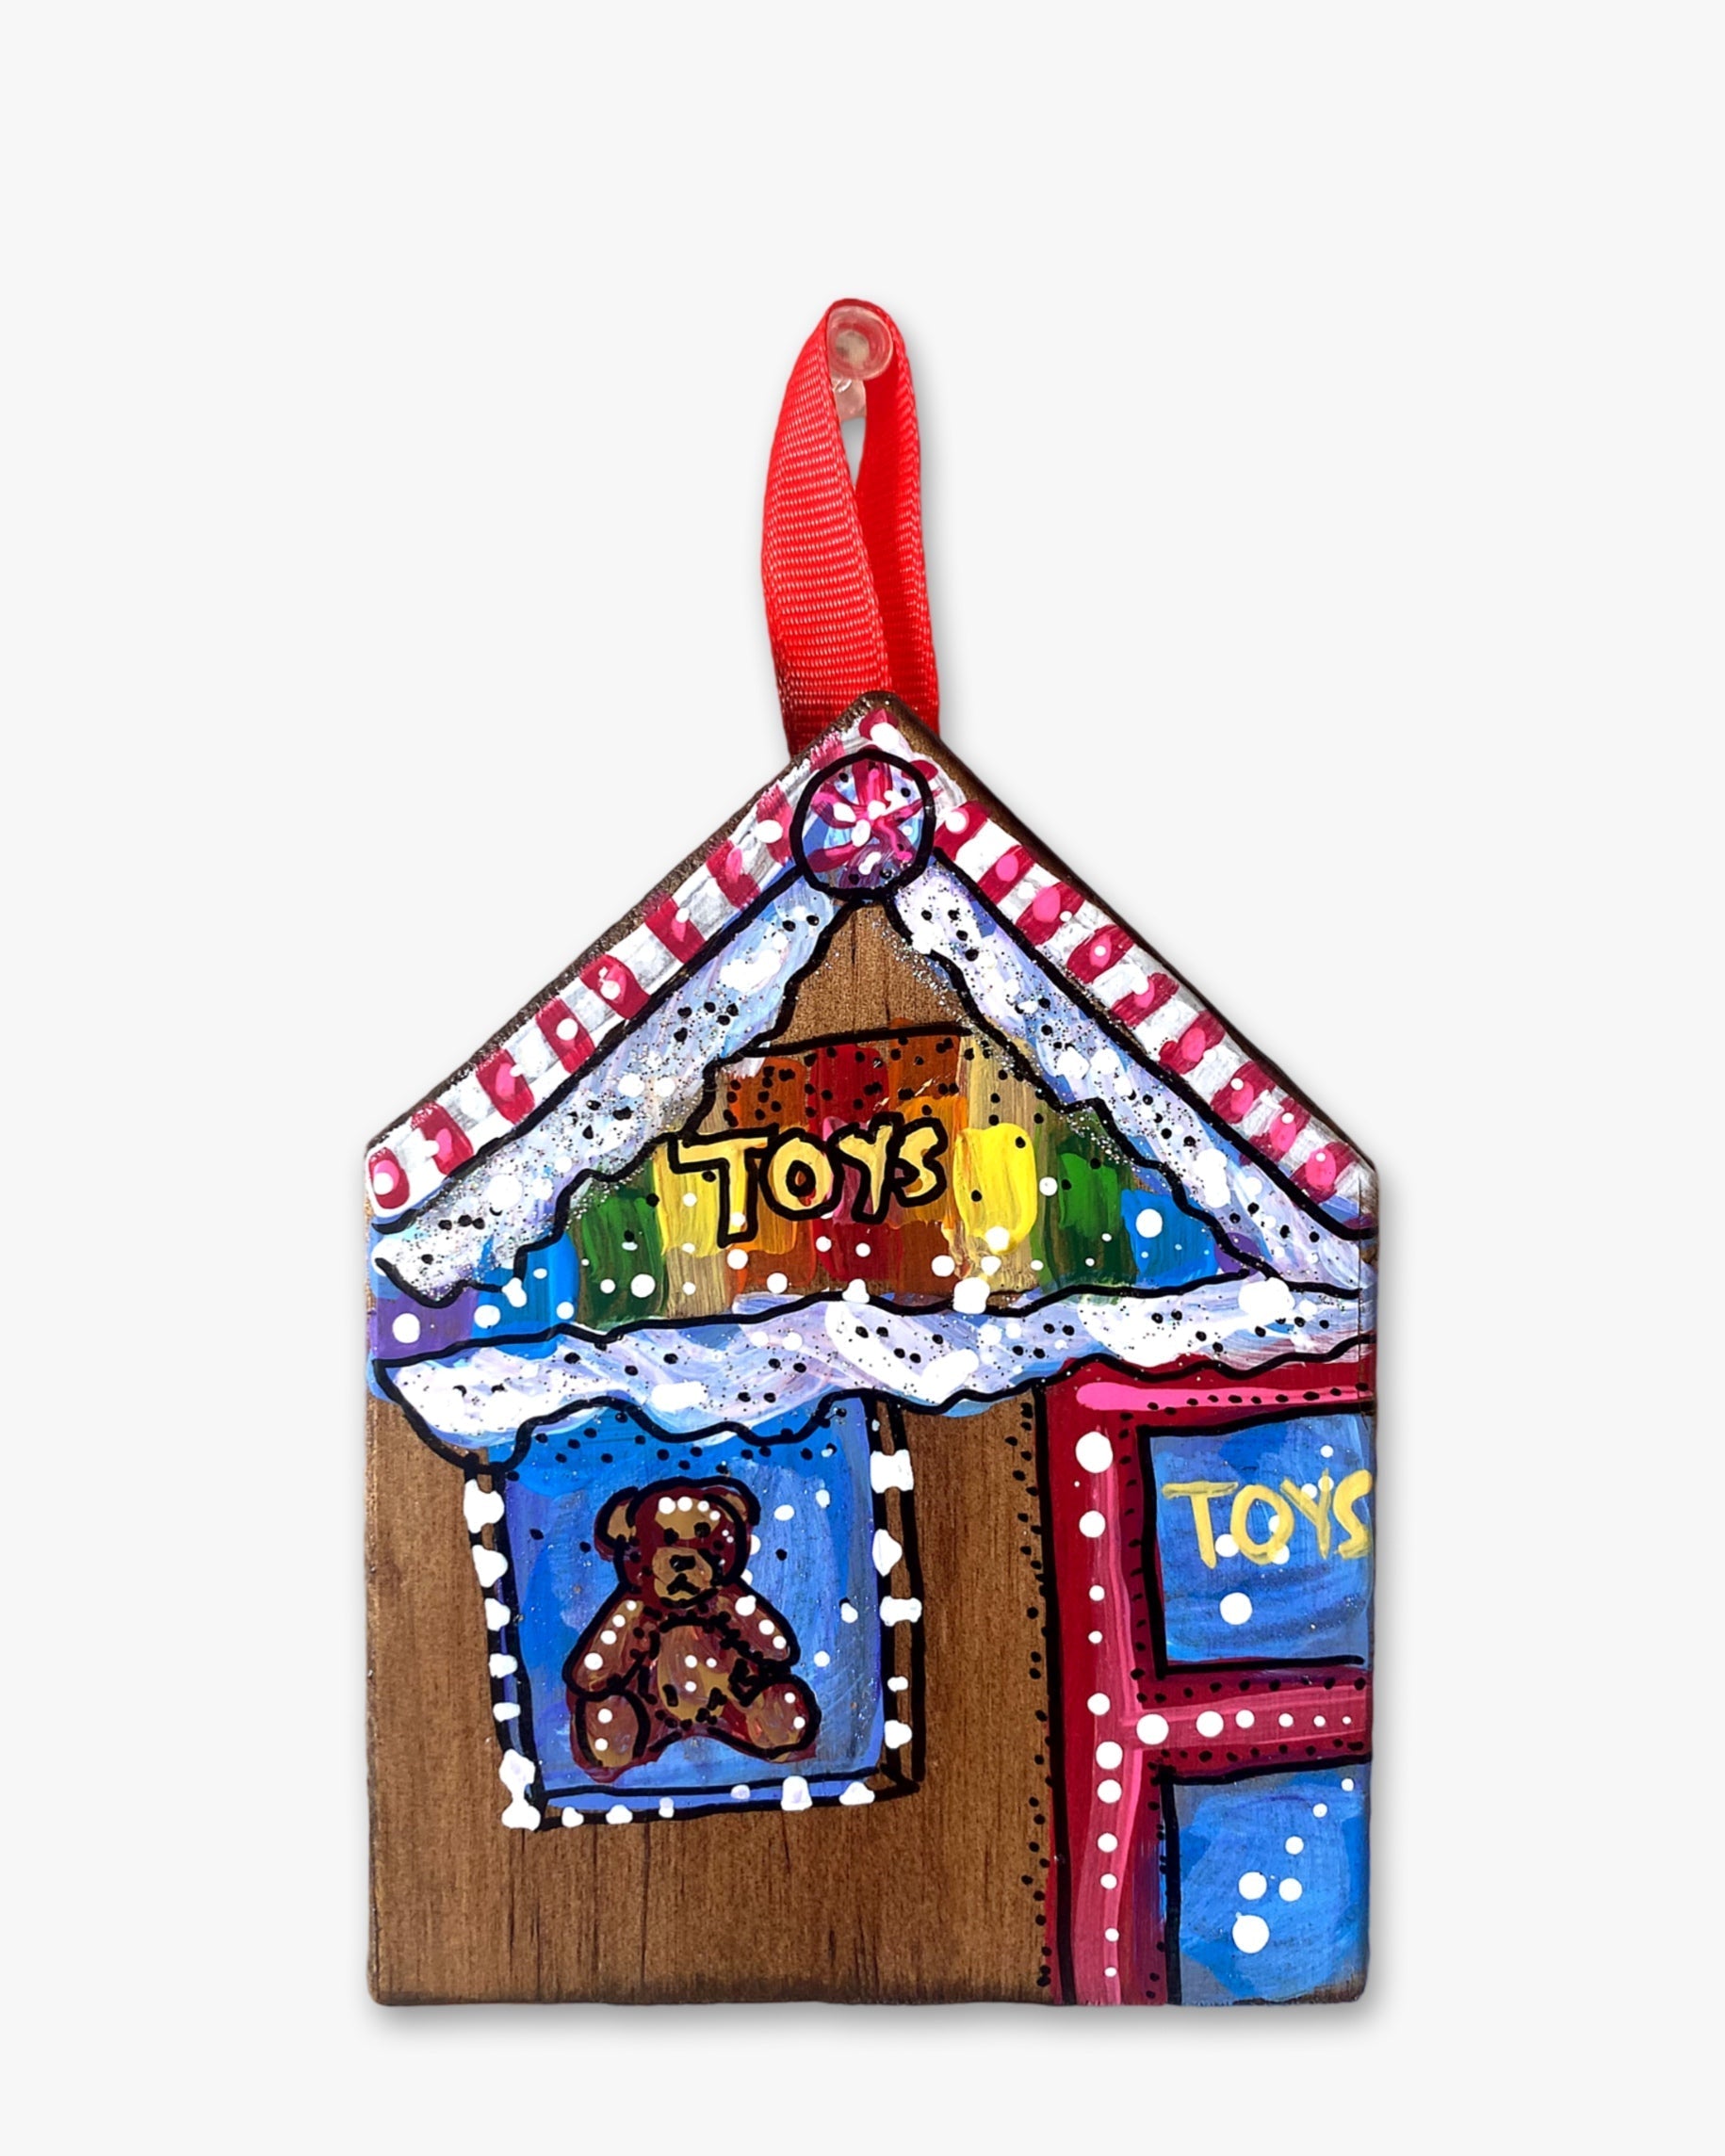 Toy Store - Hand Painted Ornament - Heather Freitas 